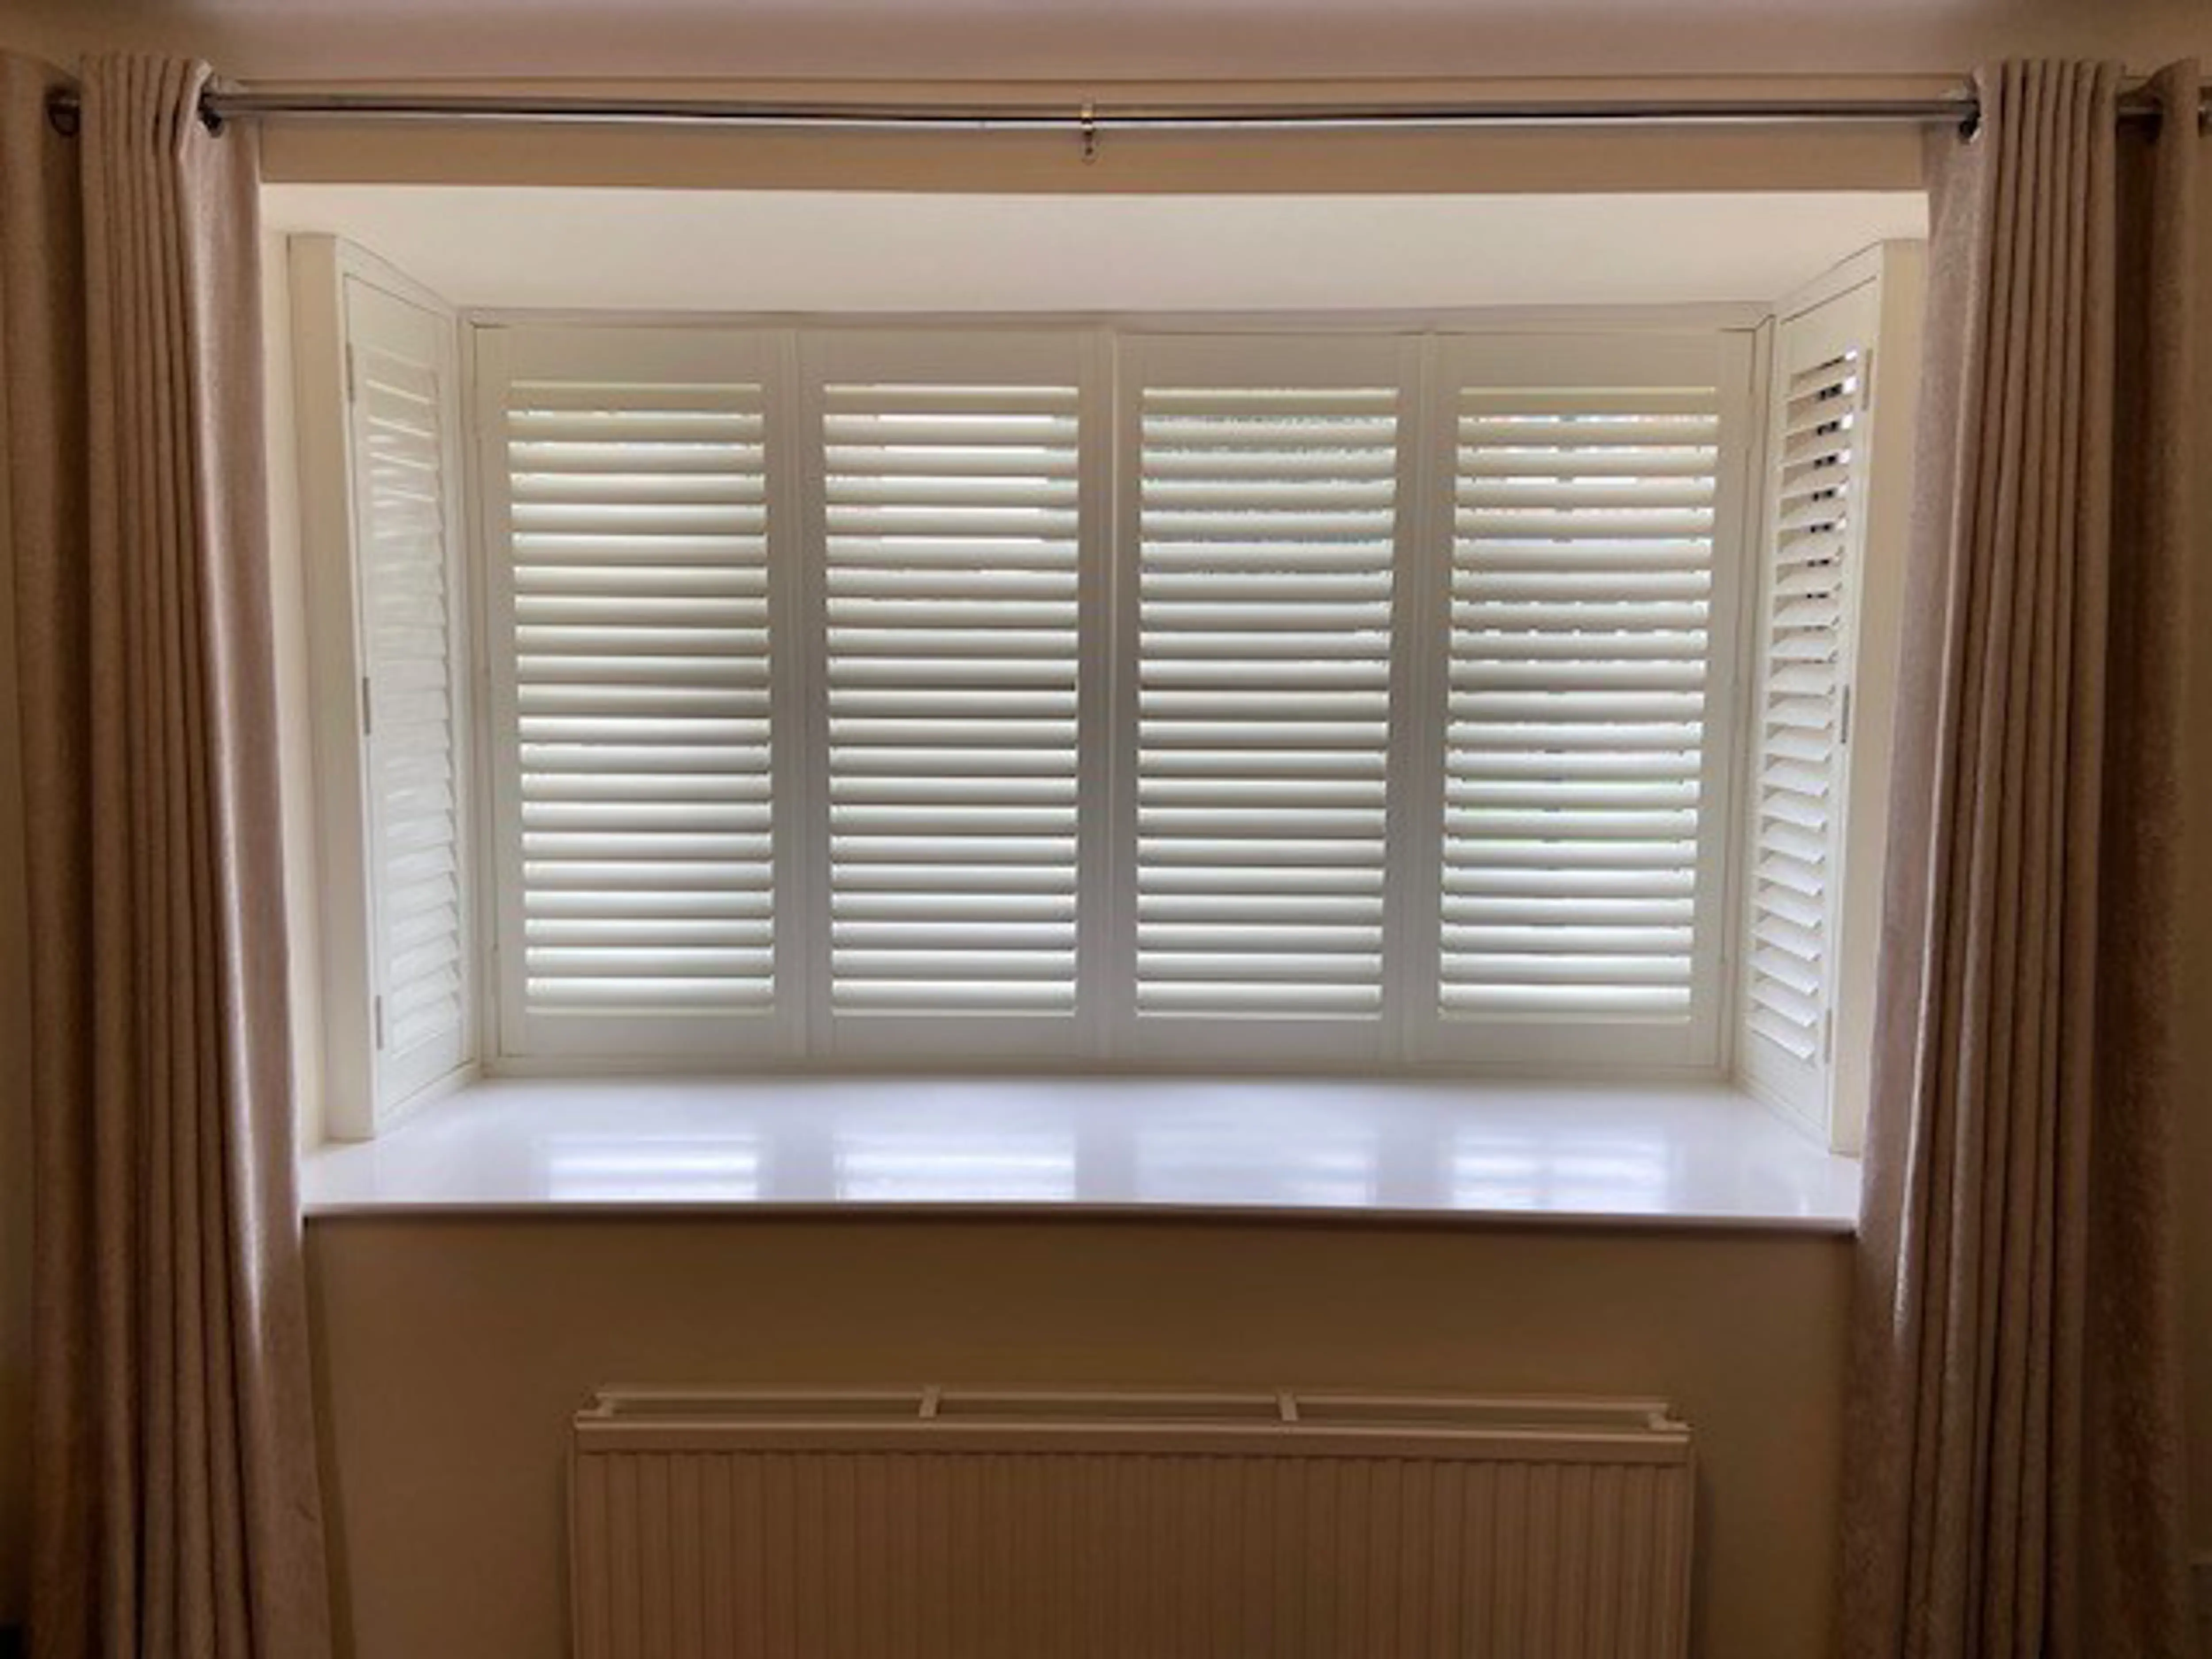 Box bay window with wooden shutters in Vivid White